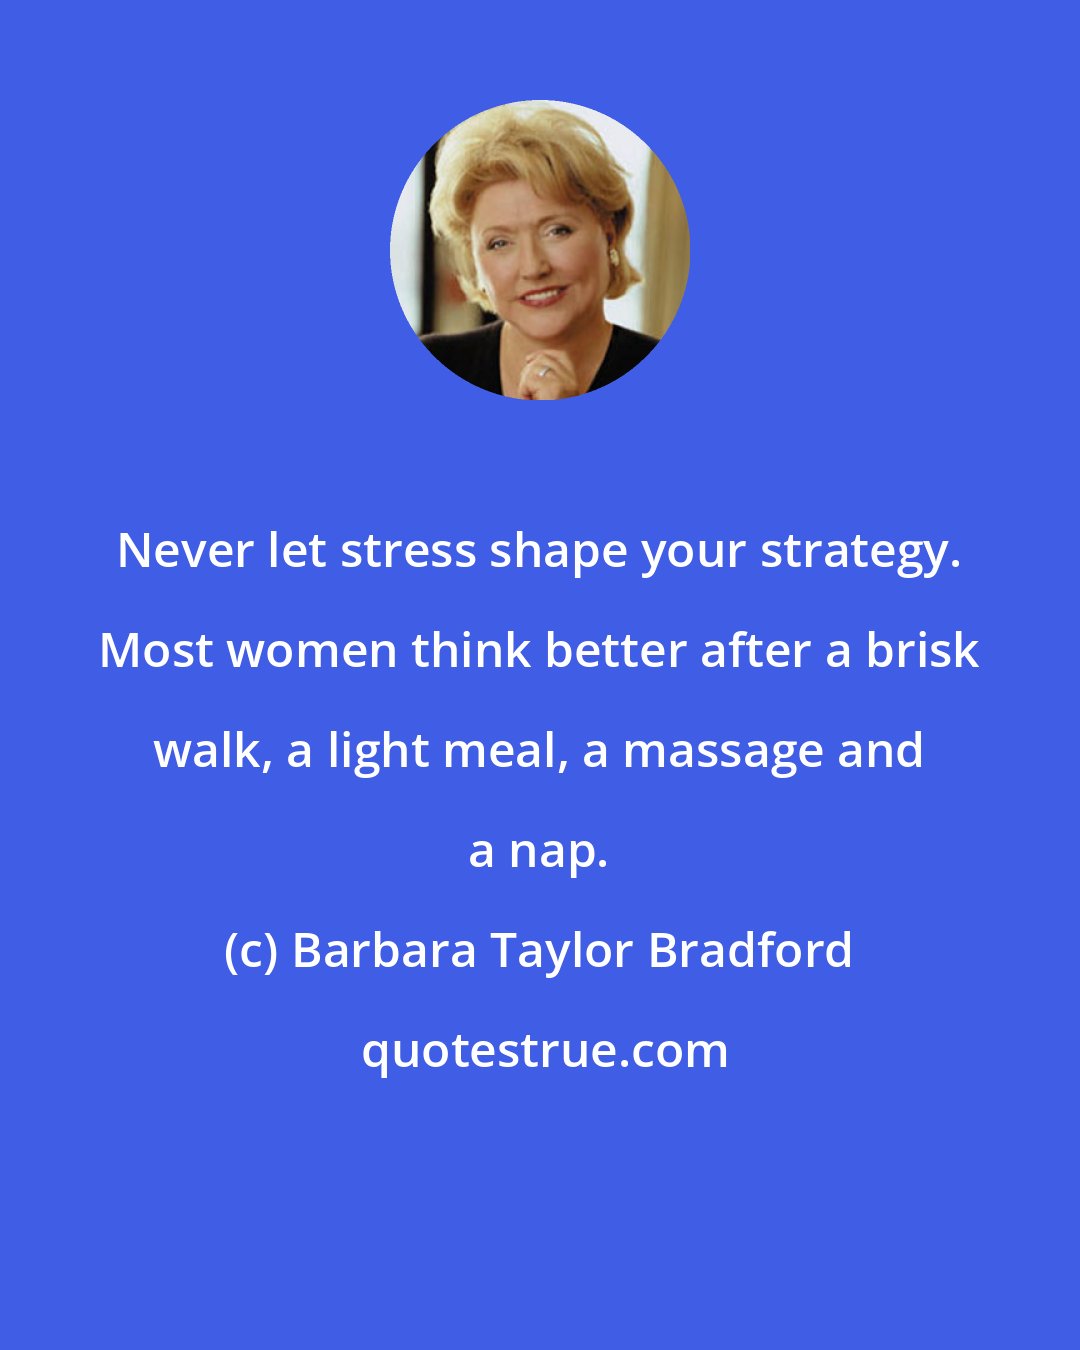 Barbara Taylor Bradford: Never let stress shape your strategy. Most women think better after a brisk walk, a light meal, a massage and a nap.